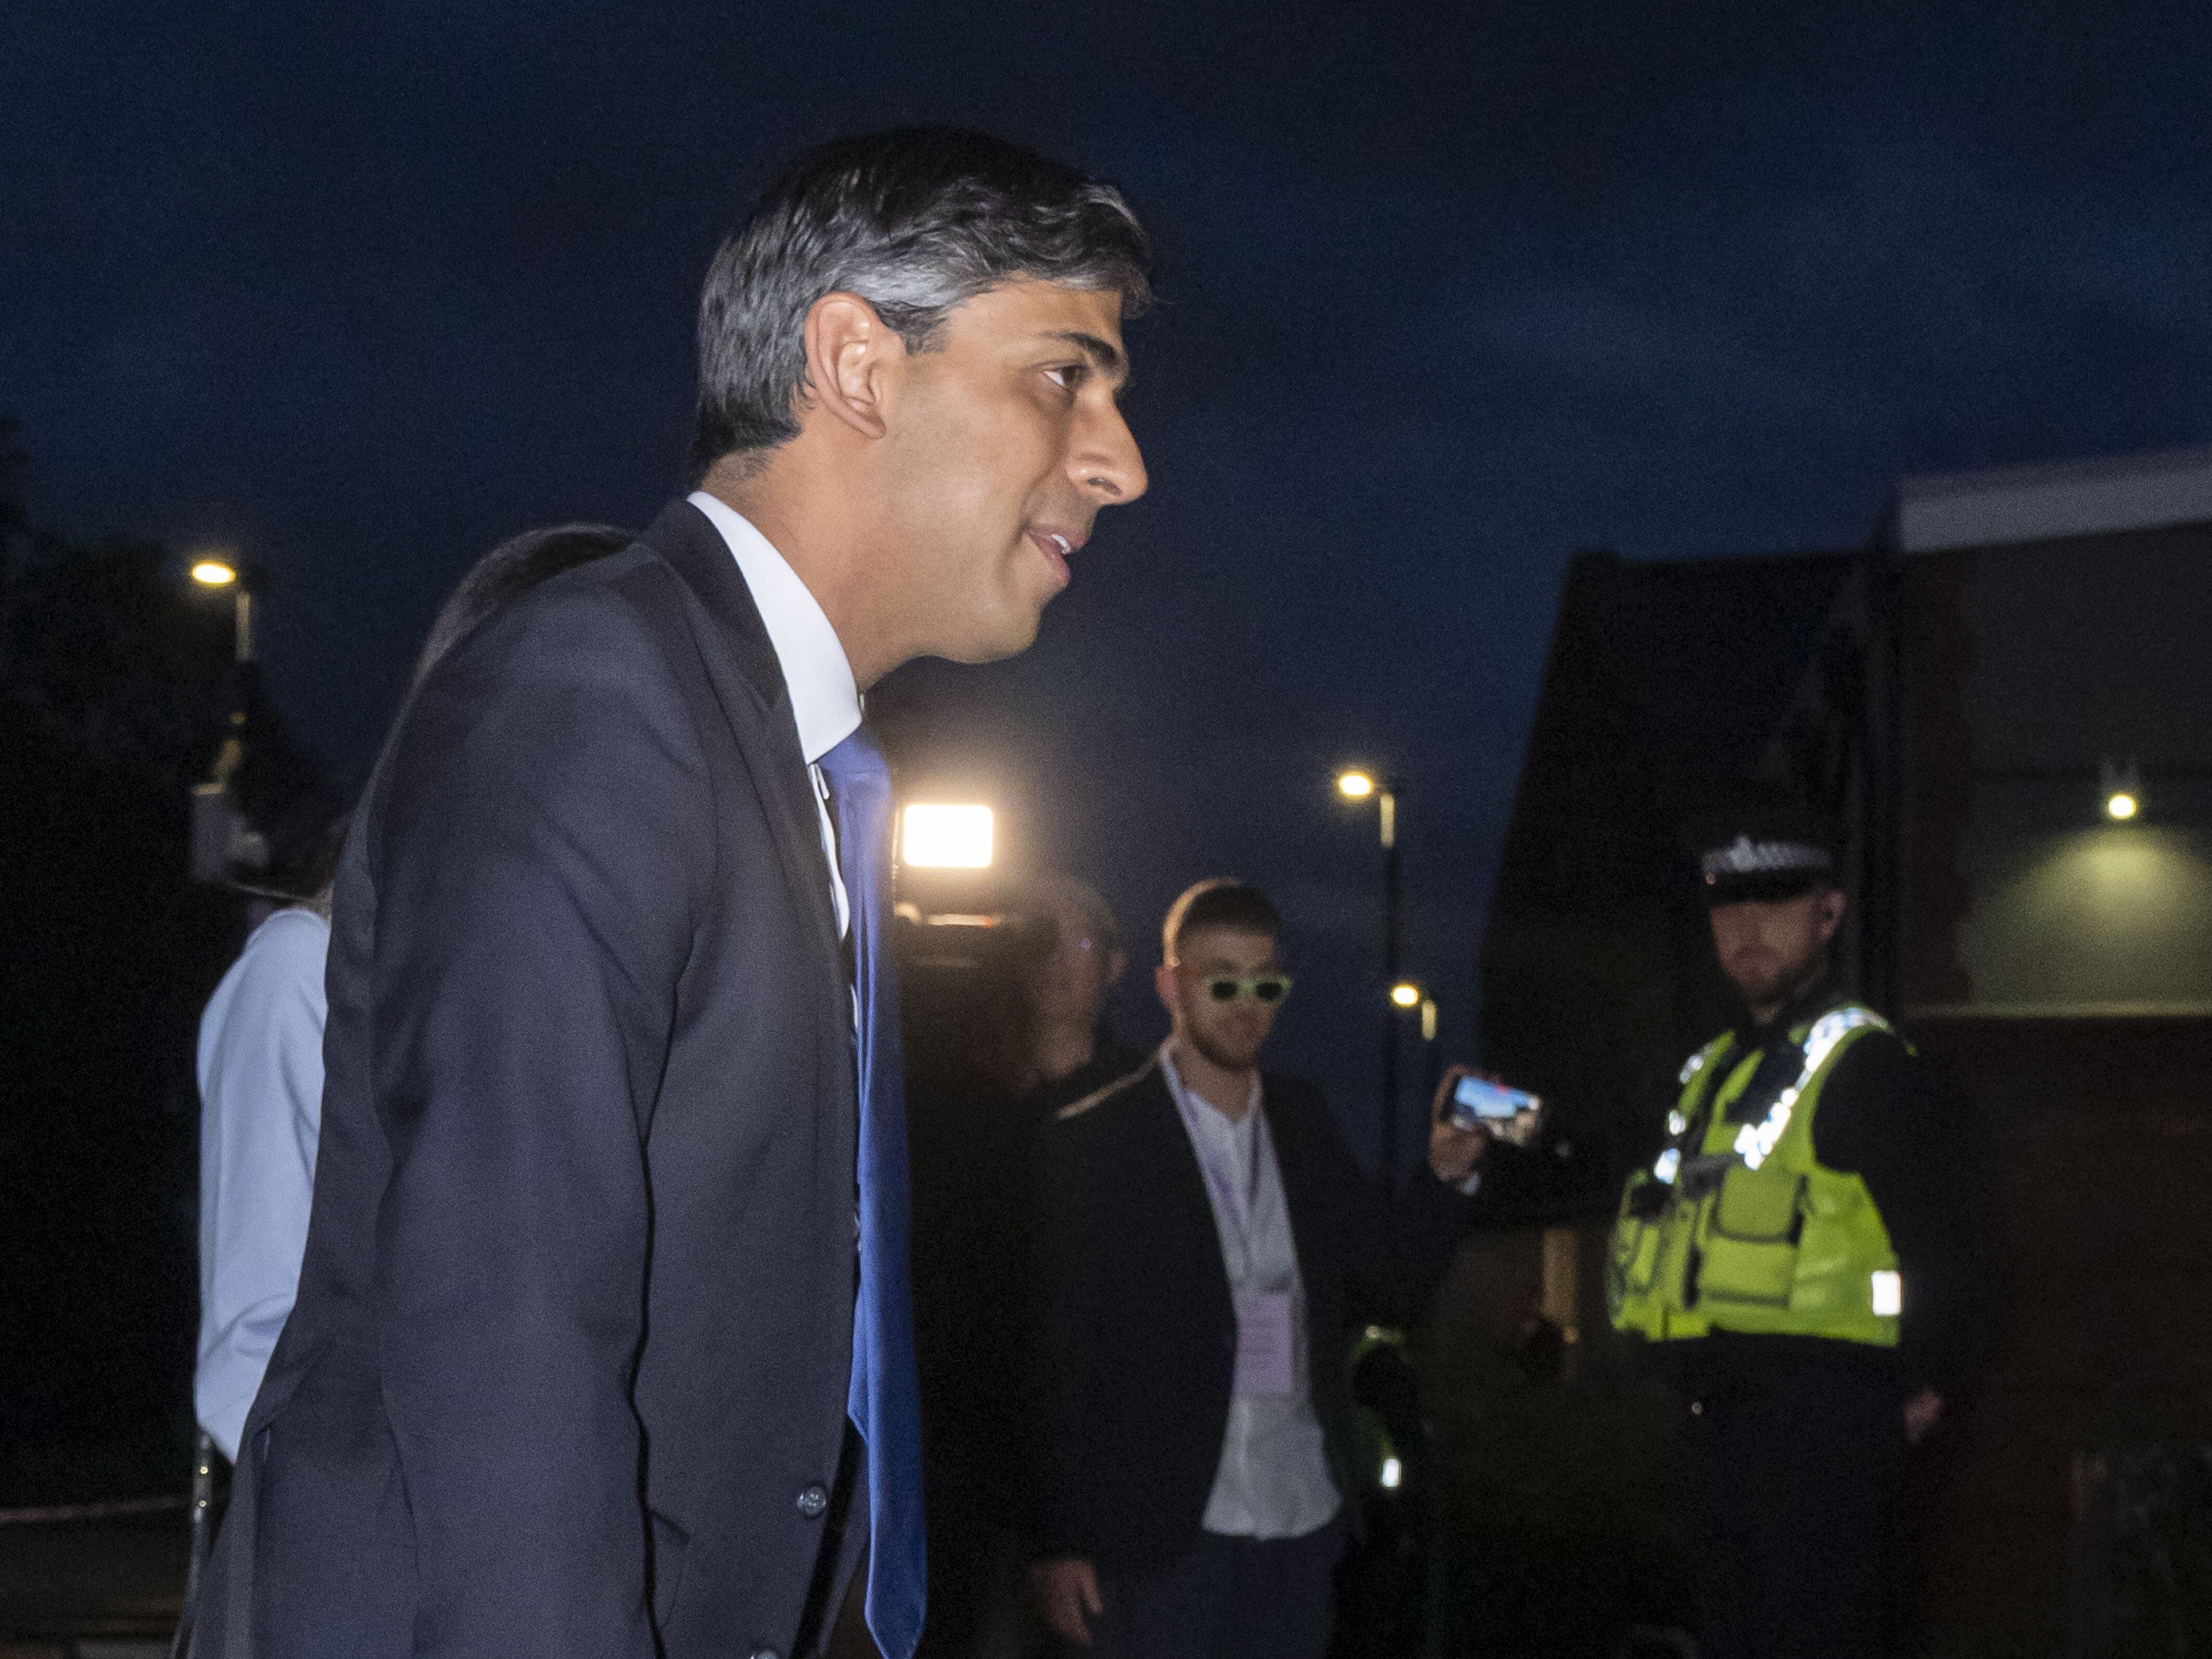 Keir Starmer to be new prime minister as Rishi Sunak concedes defeat